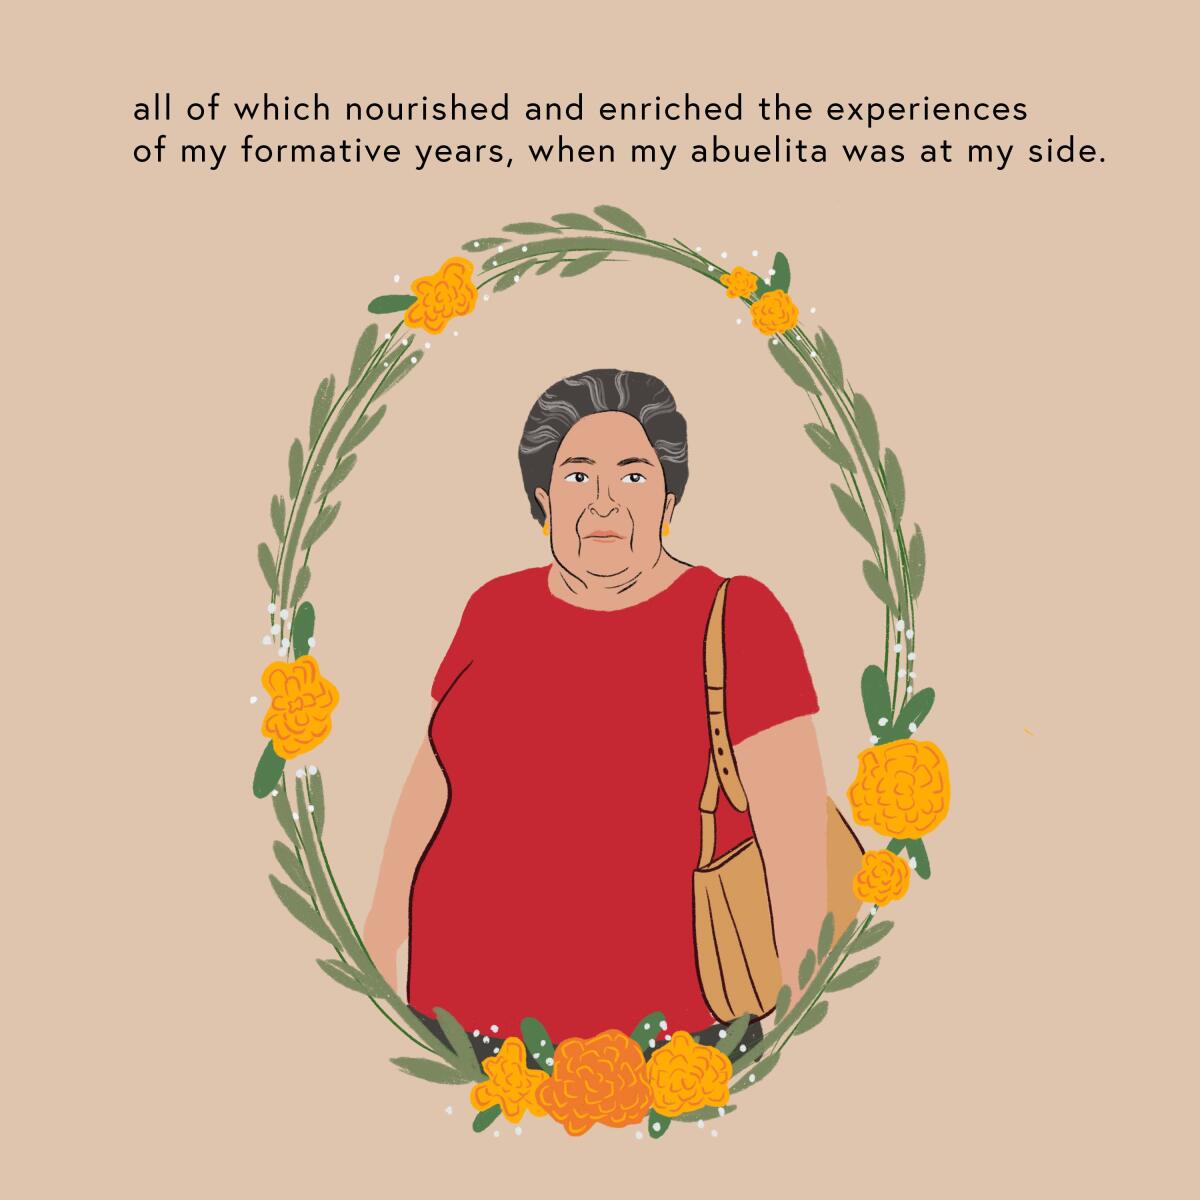 All which nourished and enriched the experiences of my formative years when my abuelita was at my side. 